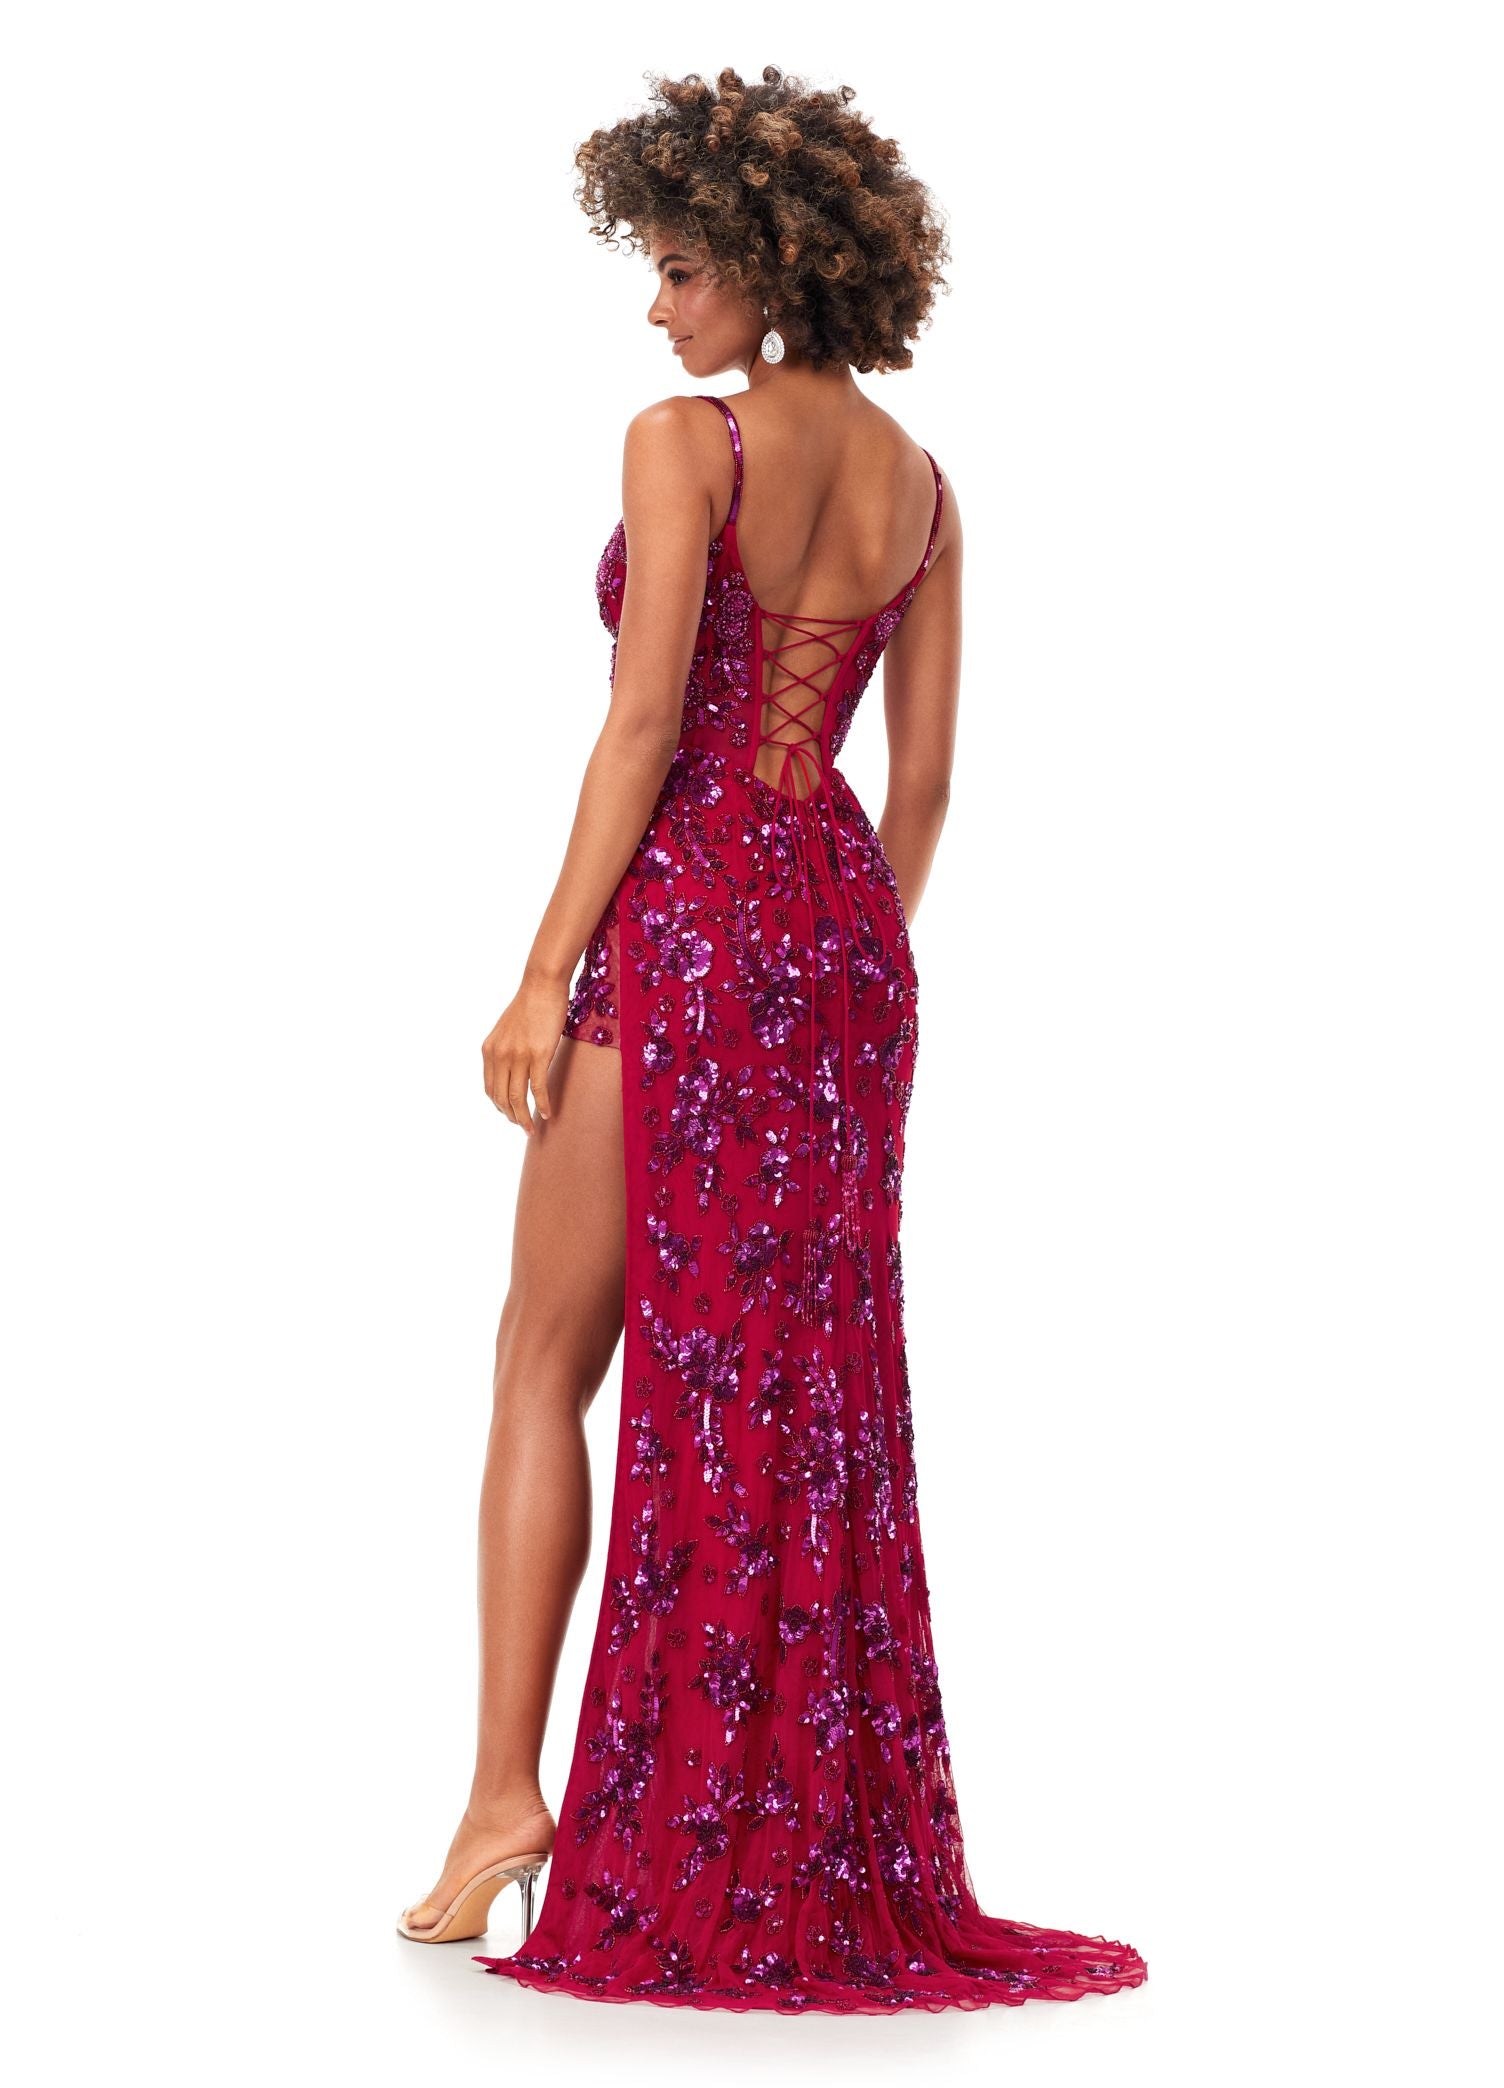 Ashley Lauren 11360 This floral beaded gown features a corset bustier with plunging v-neckline. The look is complete with a fitted skirt with high left leg slit. Sweetheart Neckline Corset Bustier Lace Up Back Left Leg Slit COLORS: Ivory, Blush, Gold/Black, Peacock, Fuchsia/Red